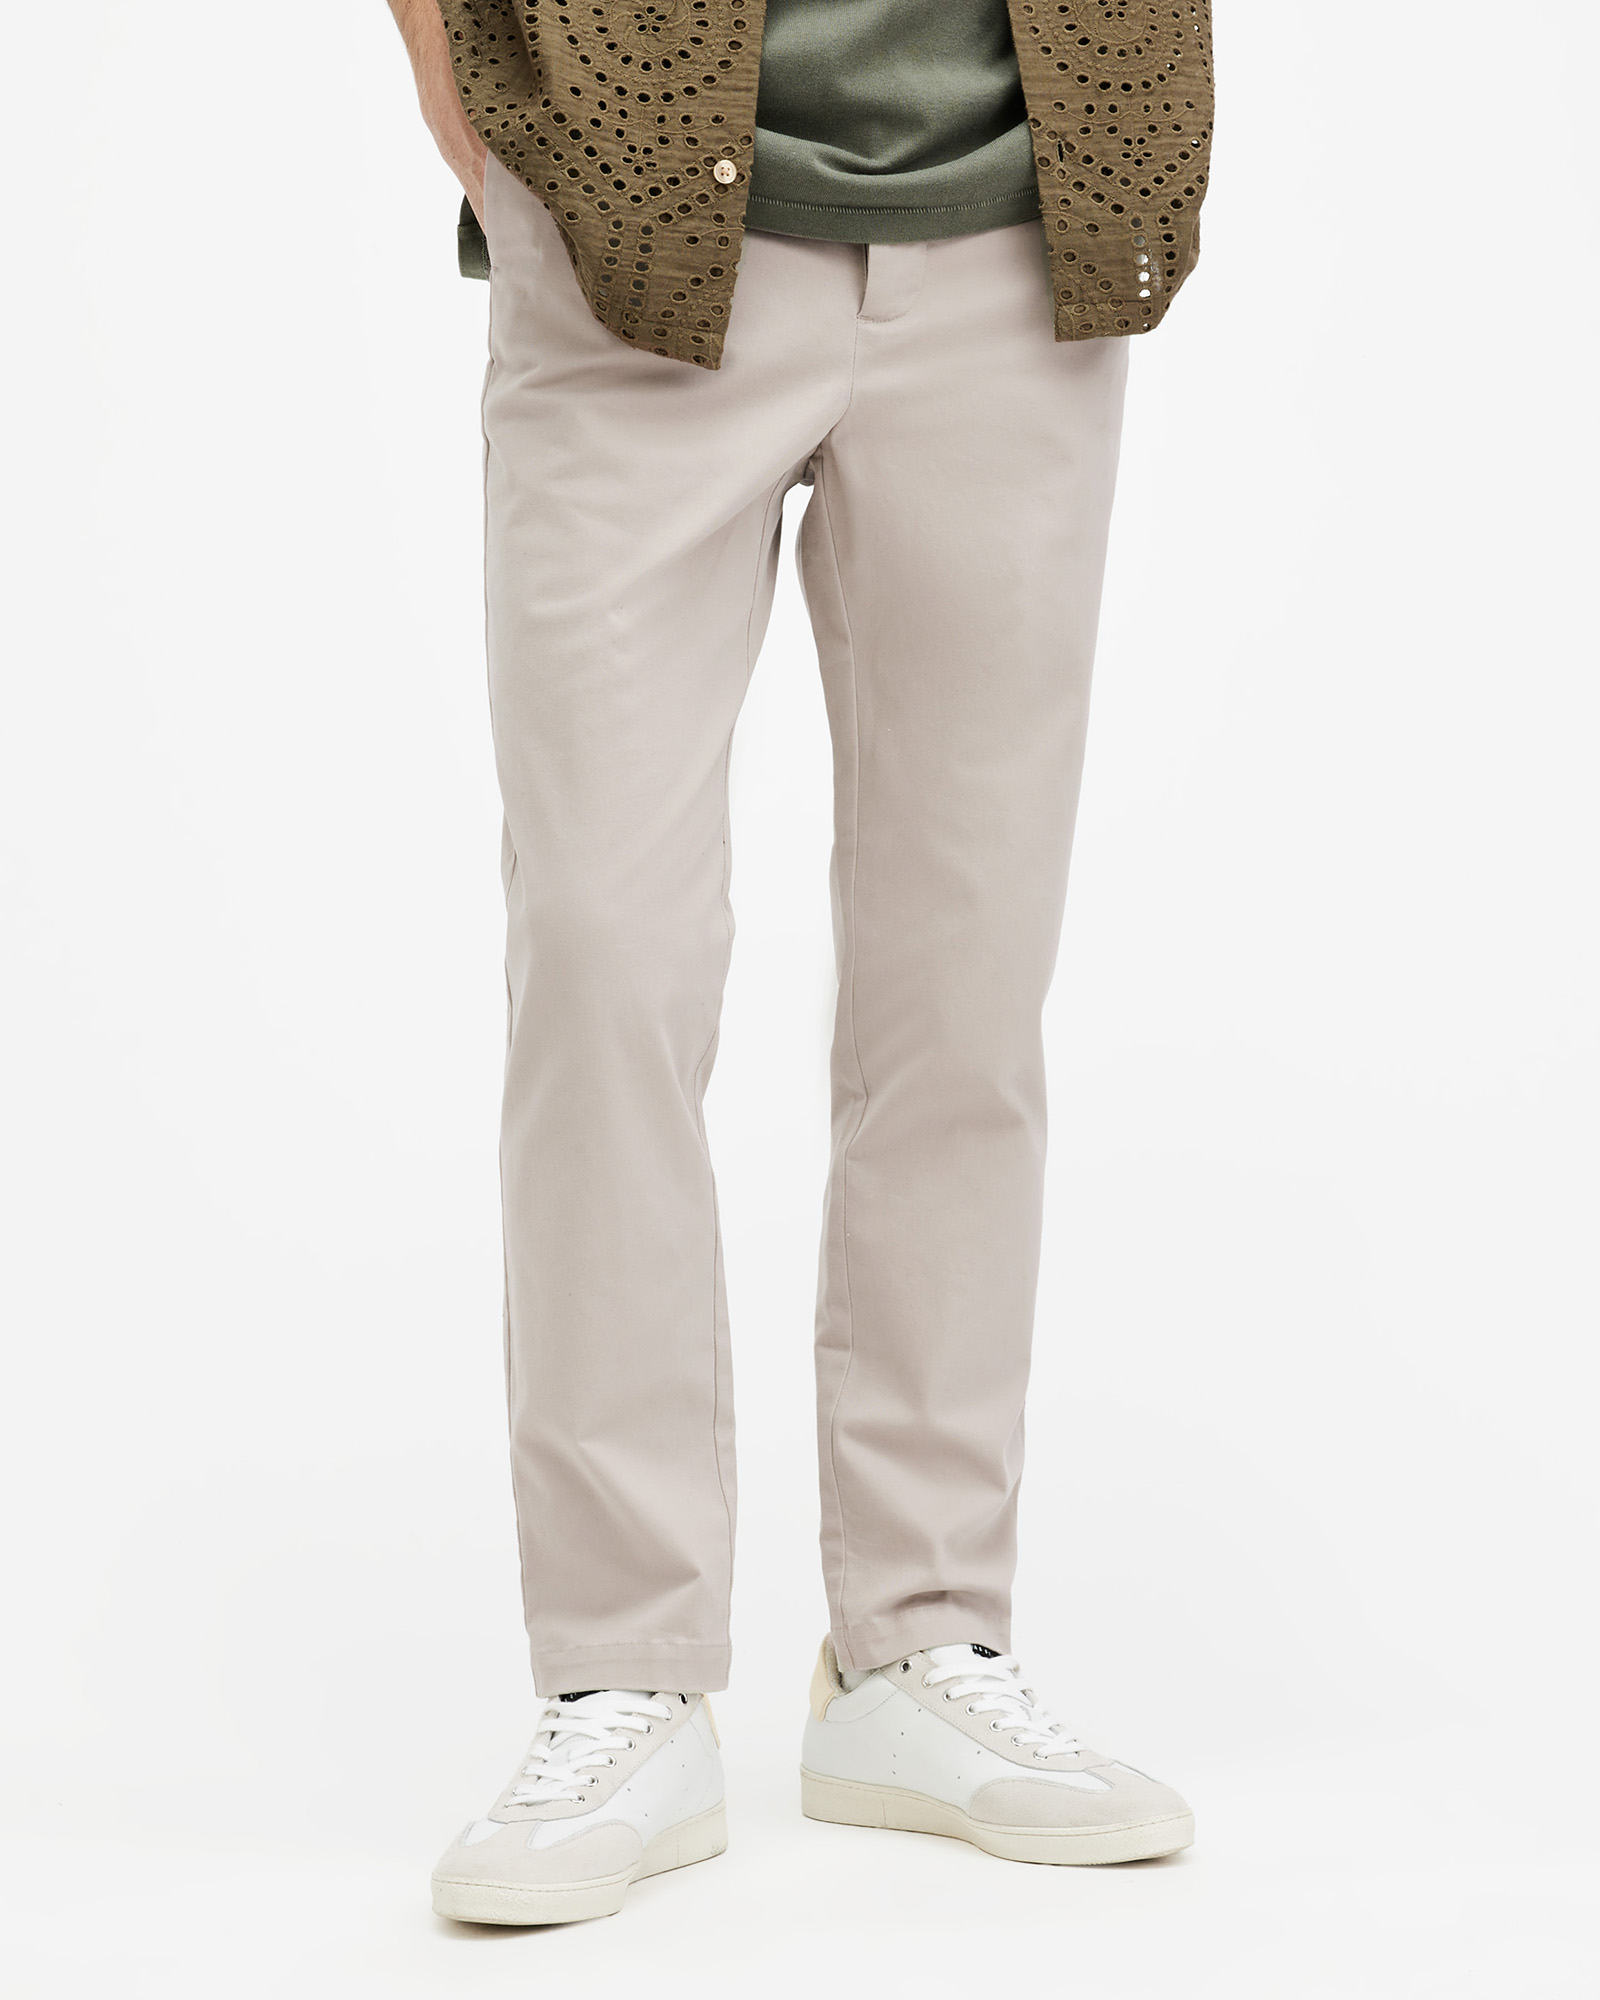 AllSaints Walde Skinny Fit Chino Trousers,, Size: